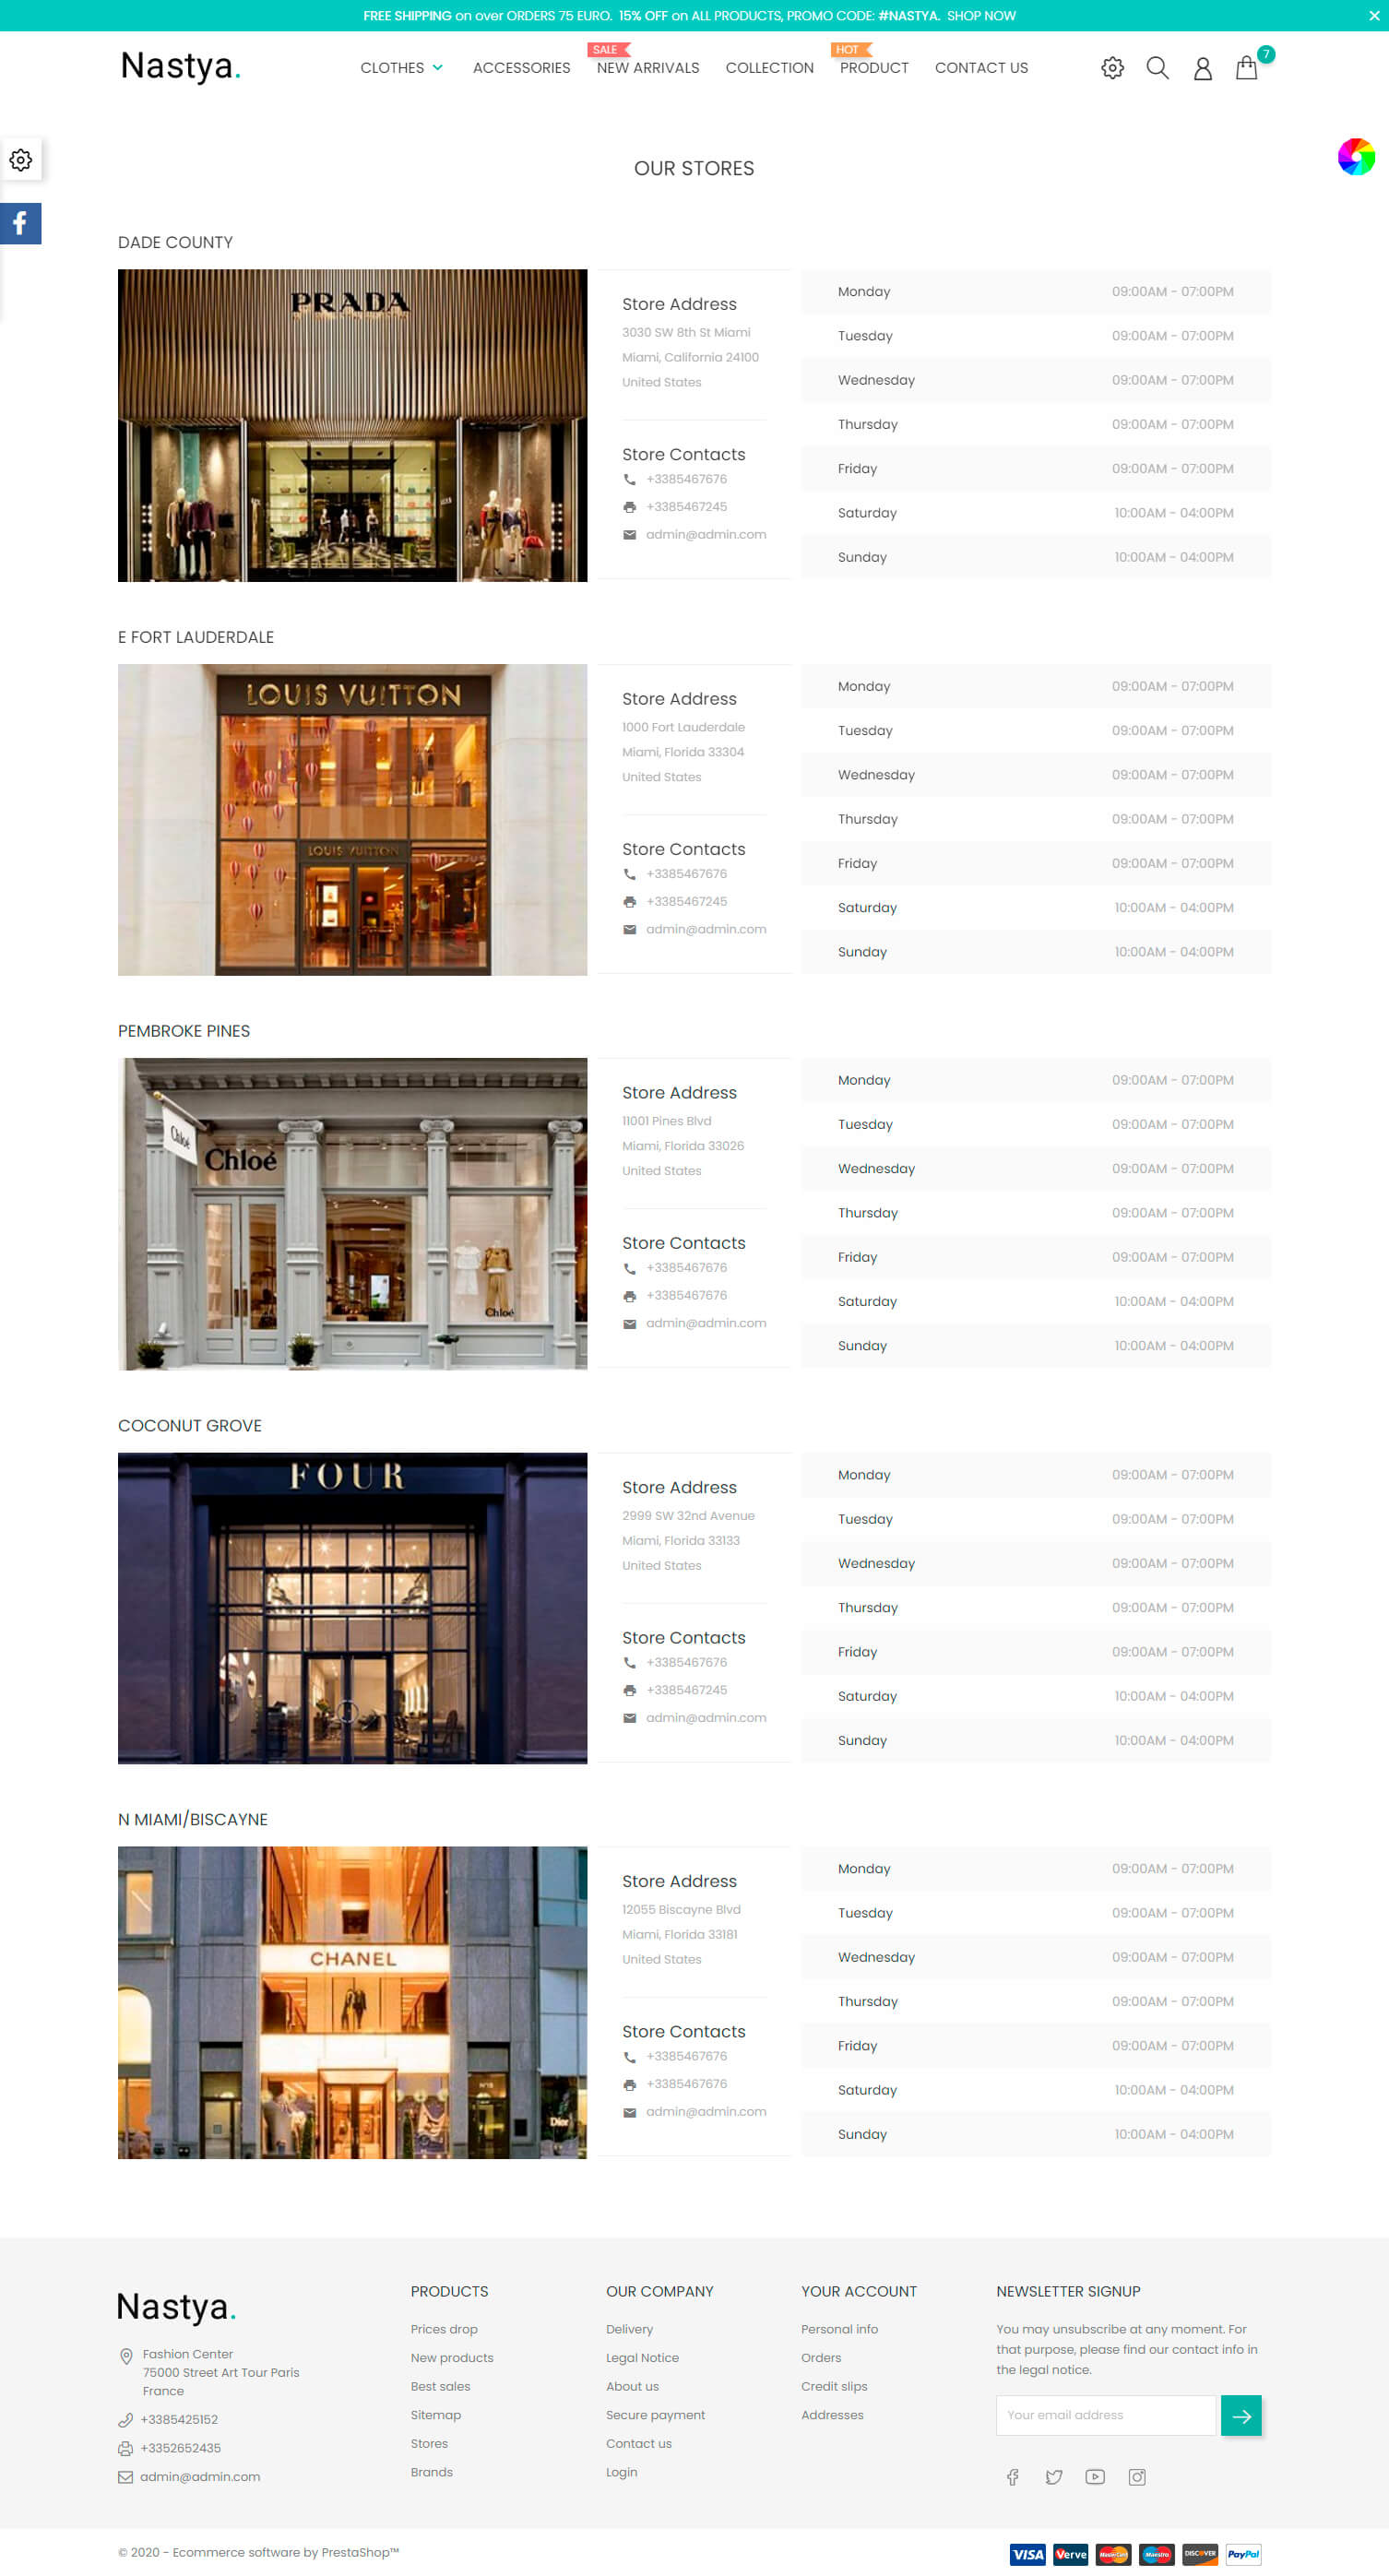 store-page